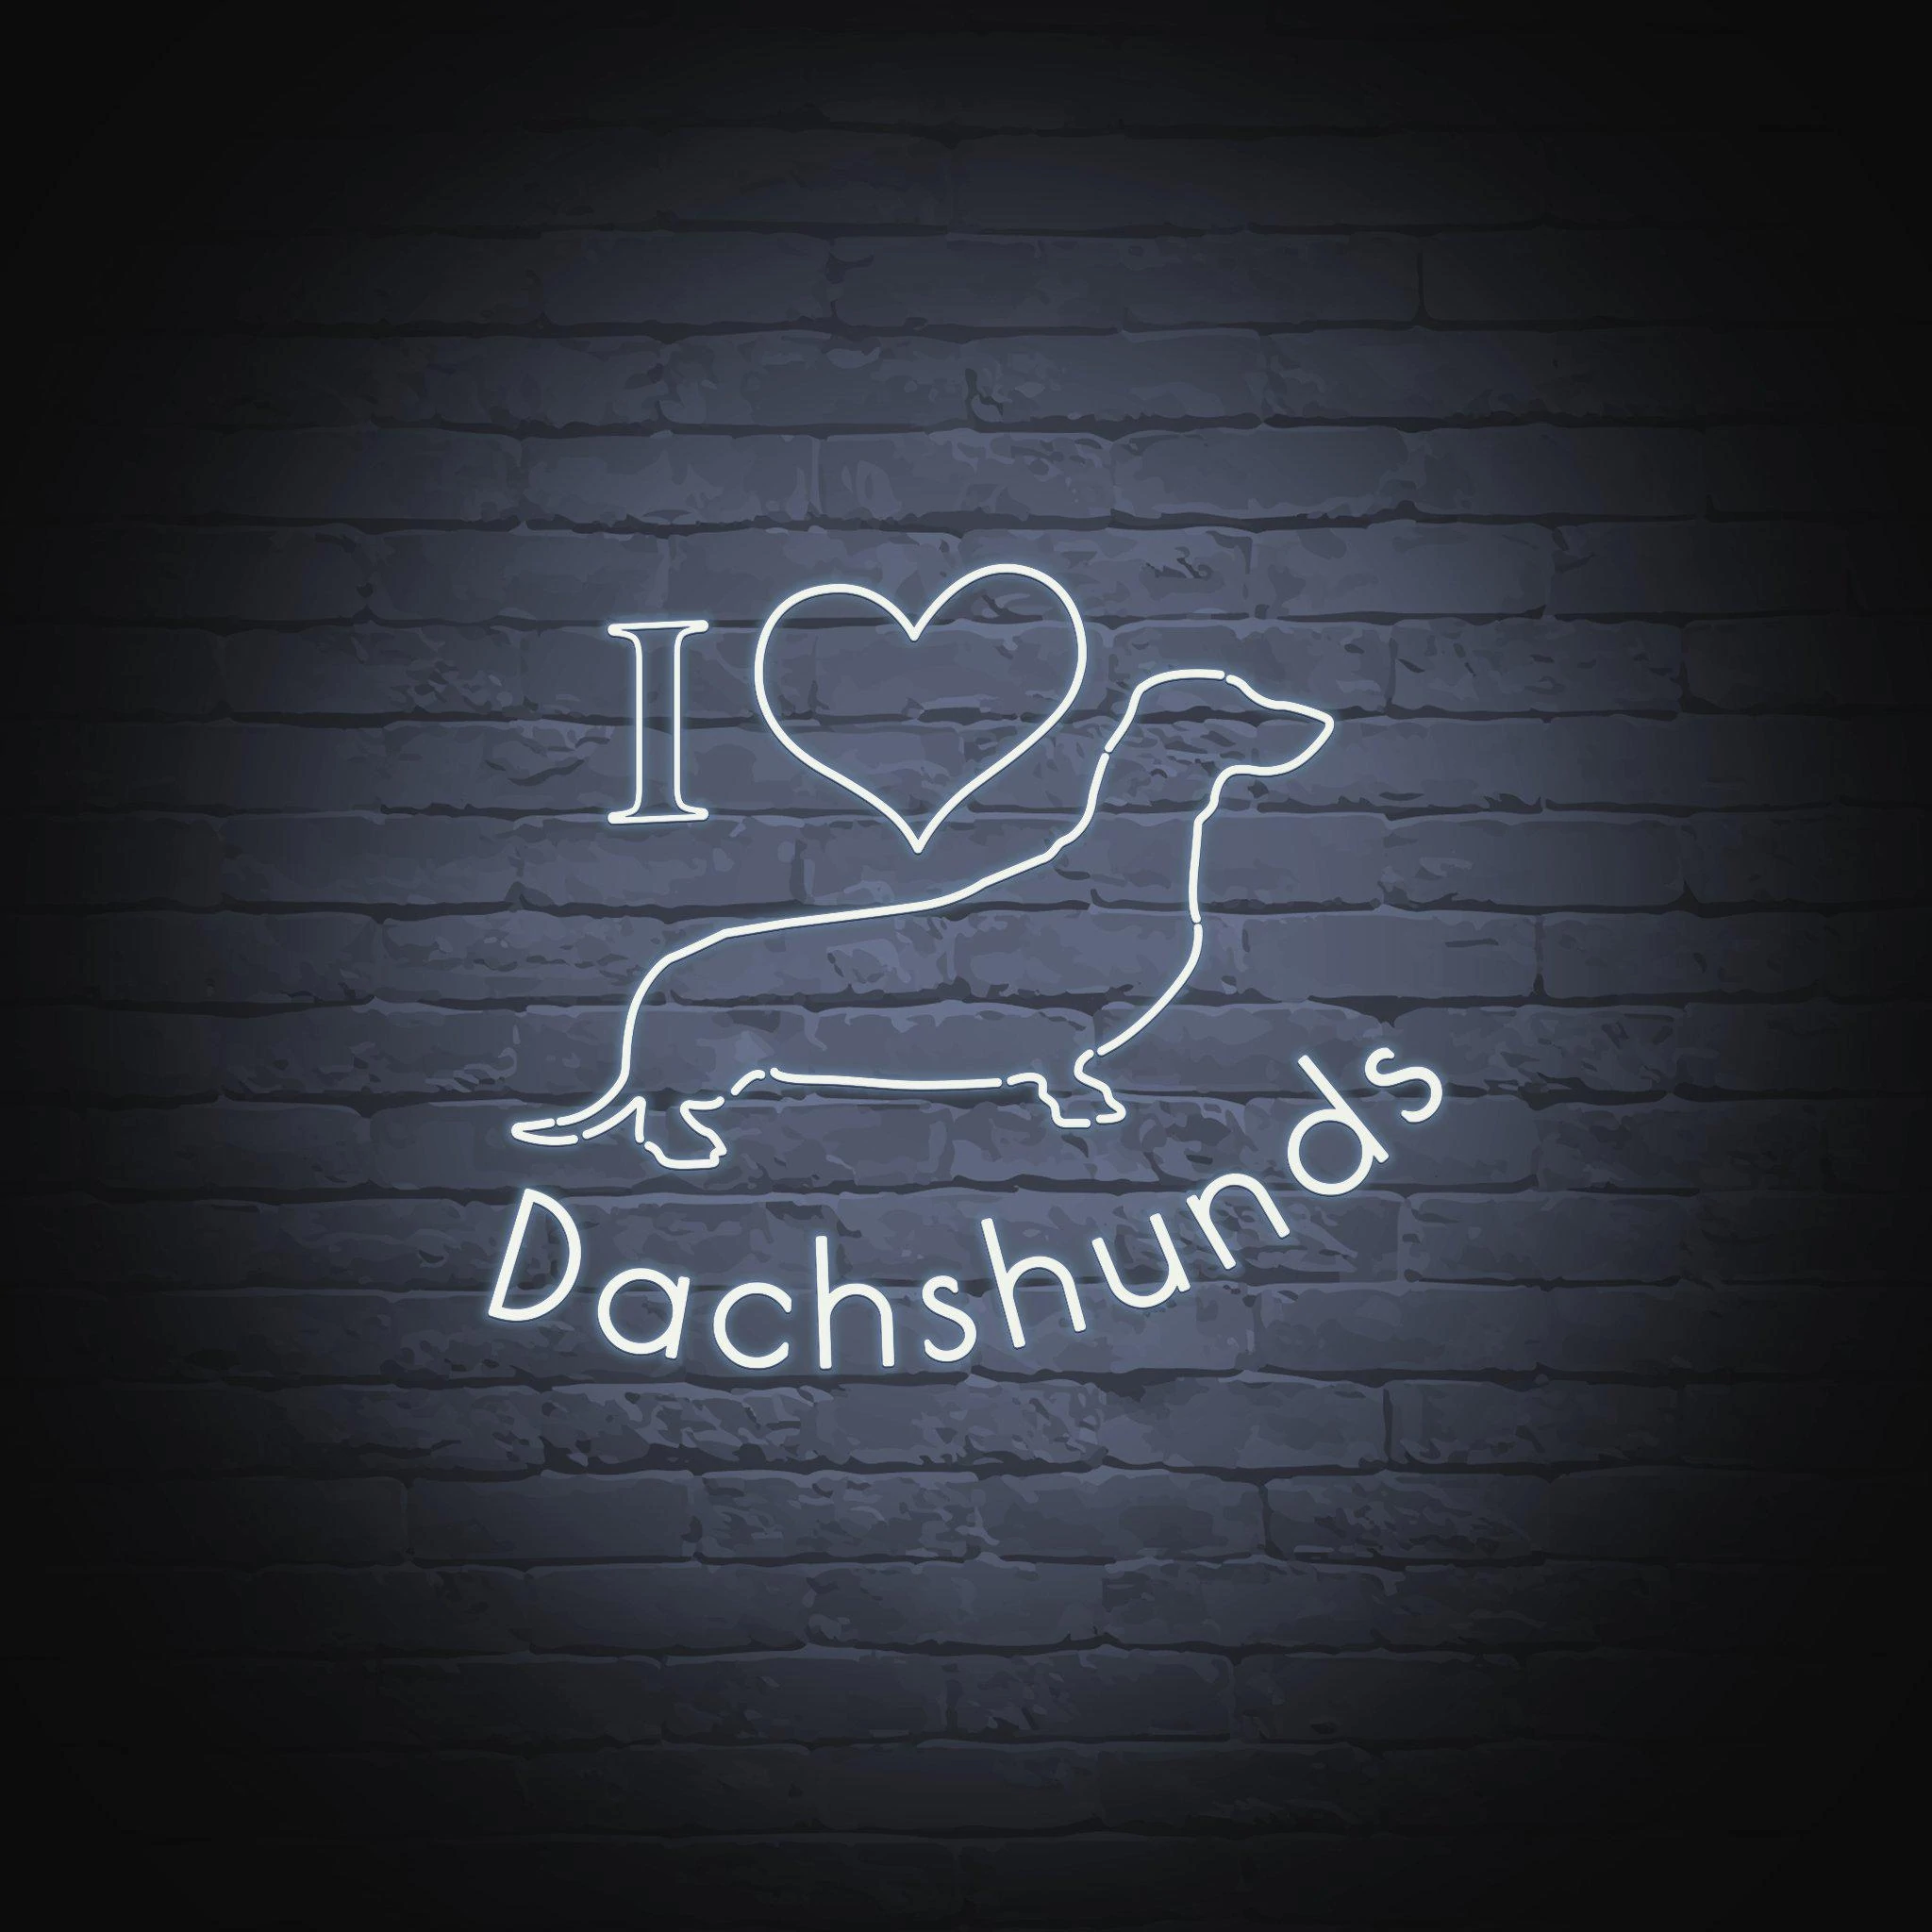 'I LOVE DACHSHUNDS' NEON SIGN - NeonFerry